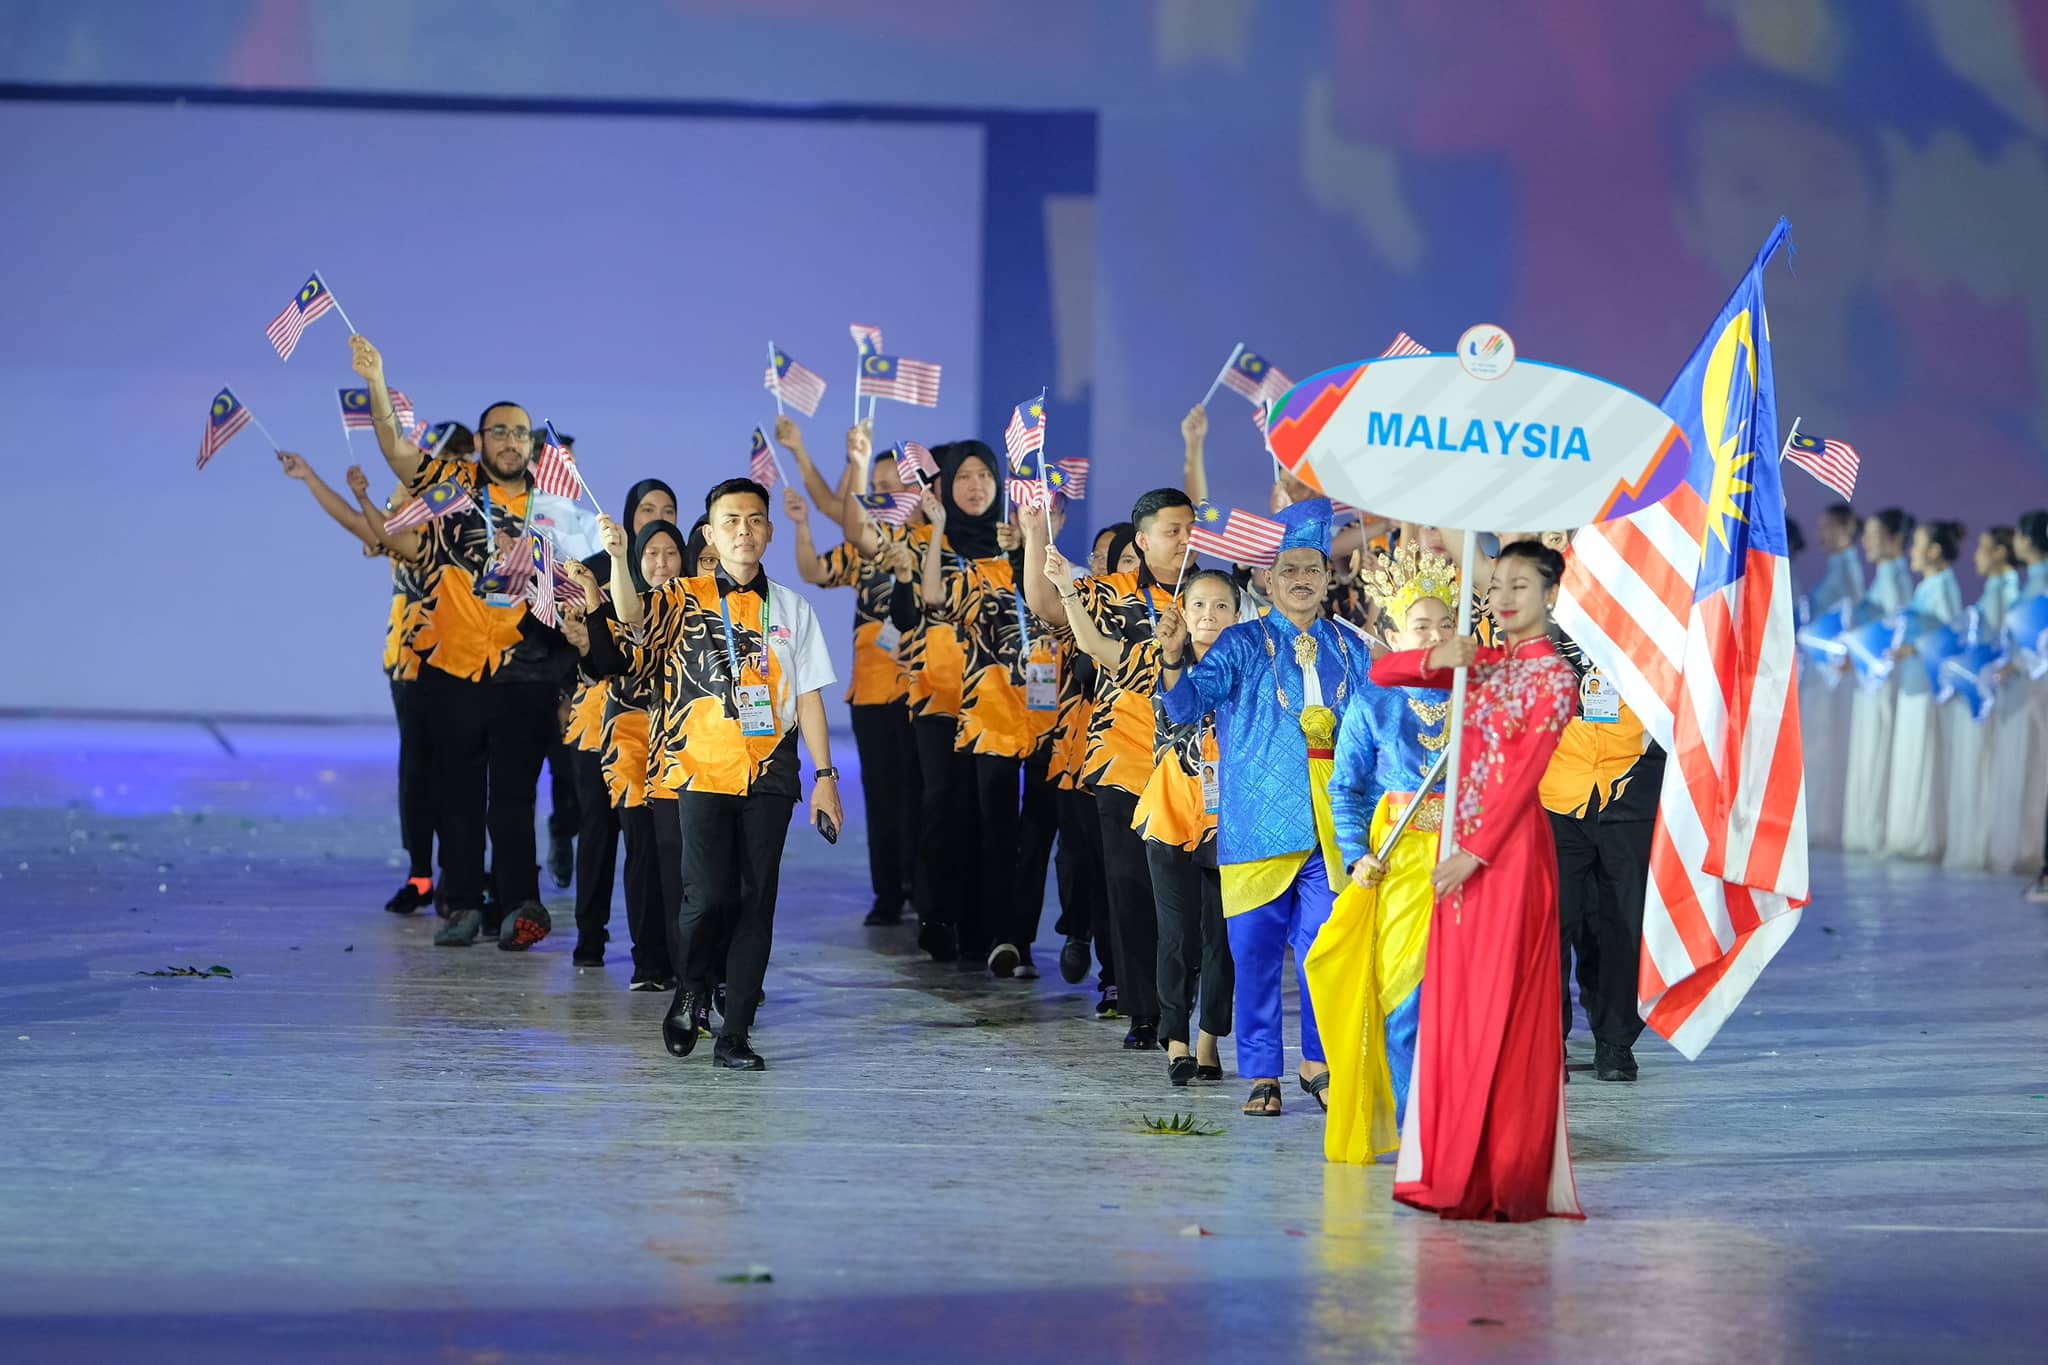 Malaysian delegates wave during the opening ceremony of the 31st Southeast Asian (SEA) Games at My Dinh National Stadium in Hanoi, Vietnam, May 12, 2022. Photo: Nam Tran / Tuoi Tre